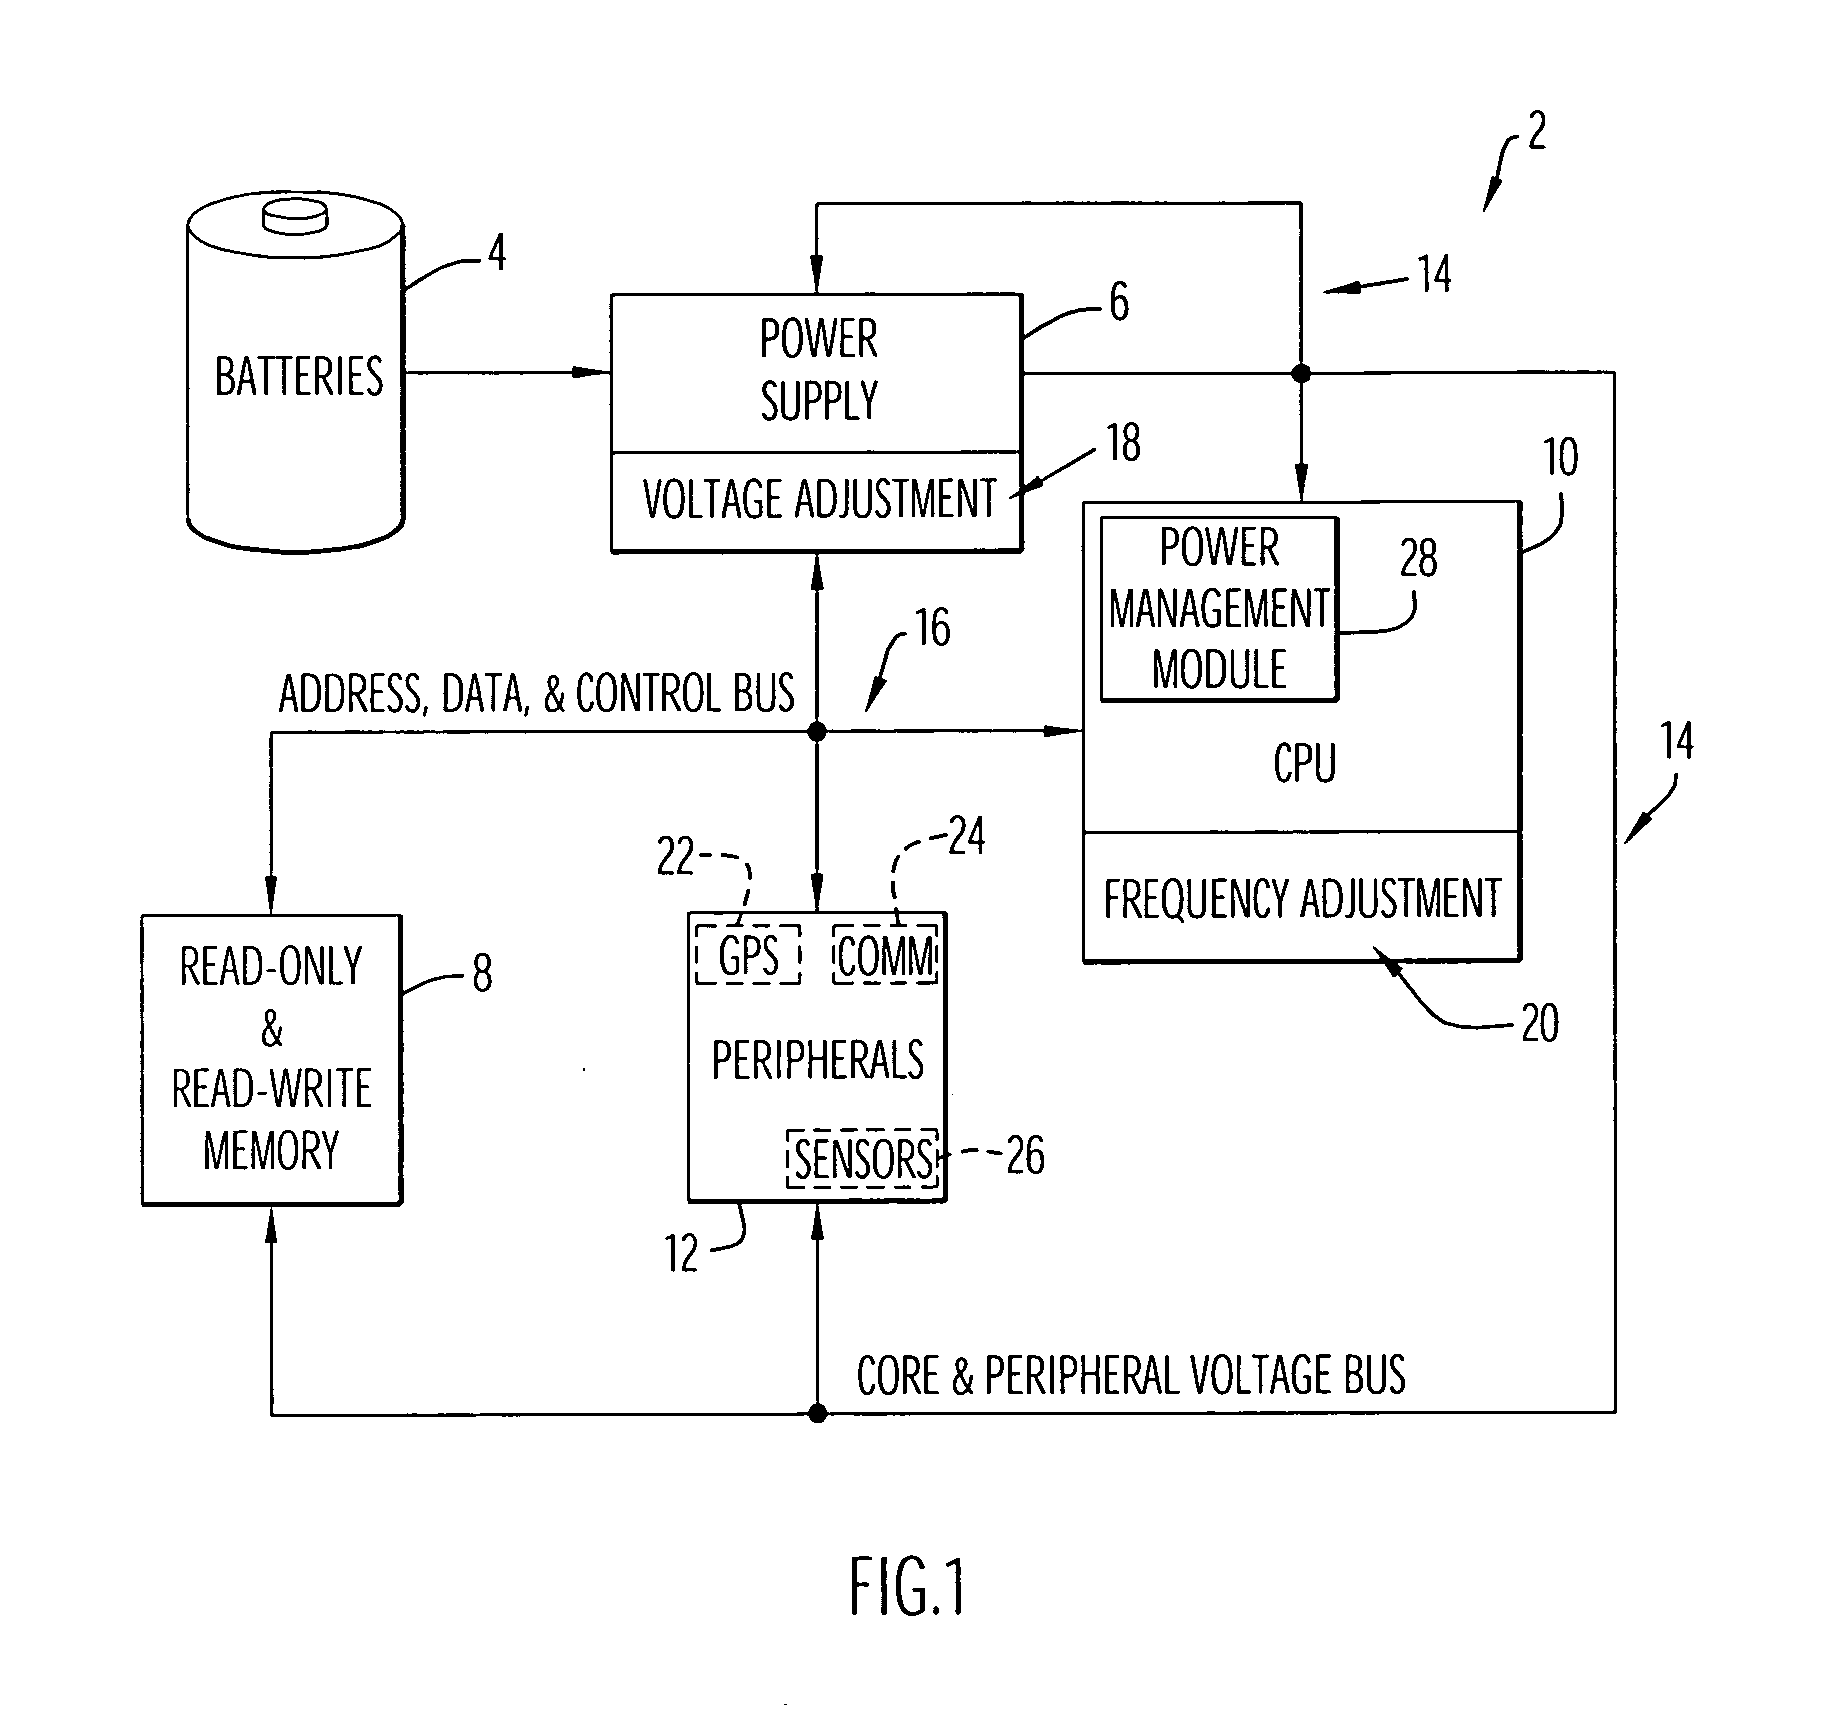 Method and apparatus for optimizing performance and battery life of electronic devices based on system and application parameters